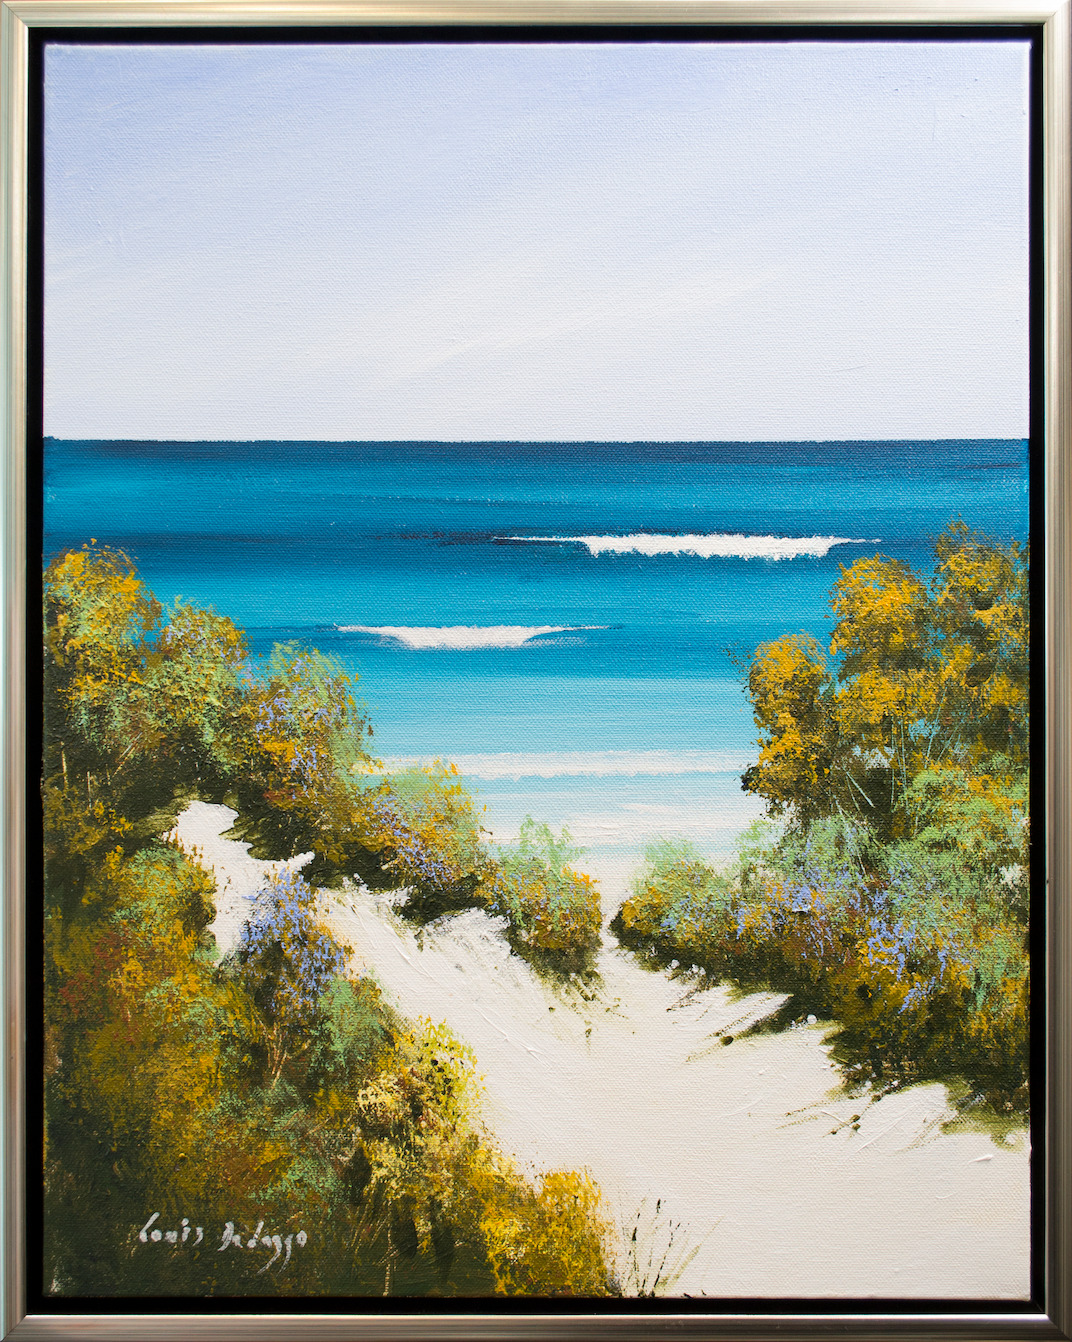 Framed Front View Of Seascape Painting "Through The Sand Dunes" By Louis Dalozzo